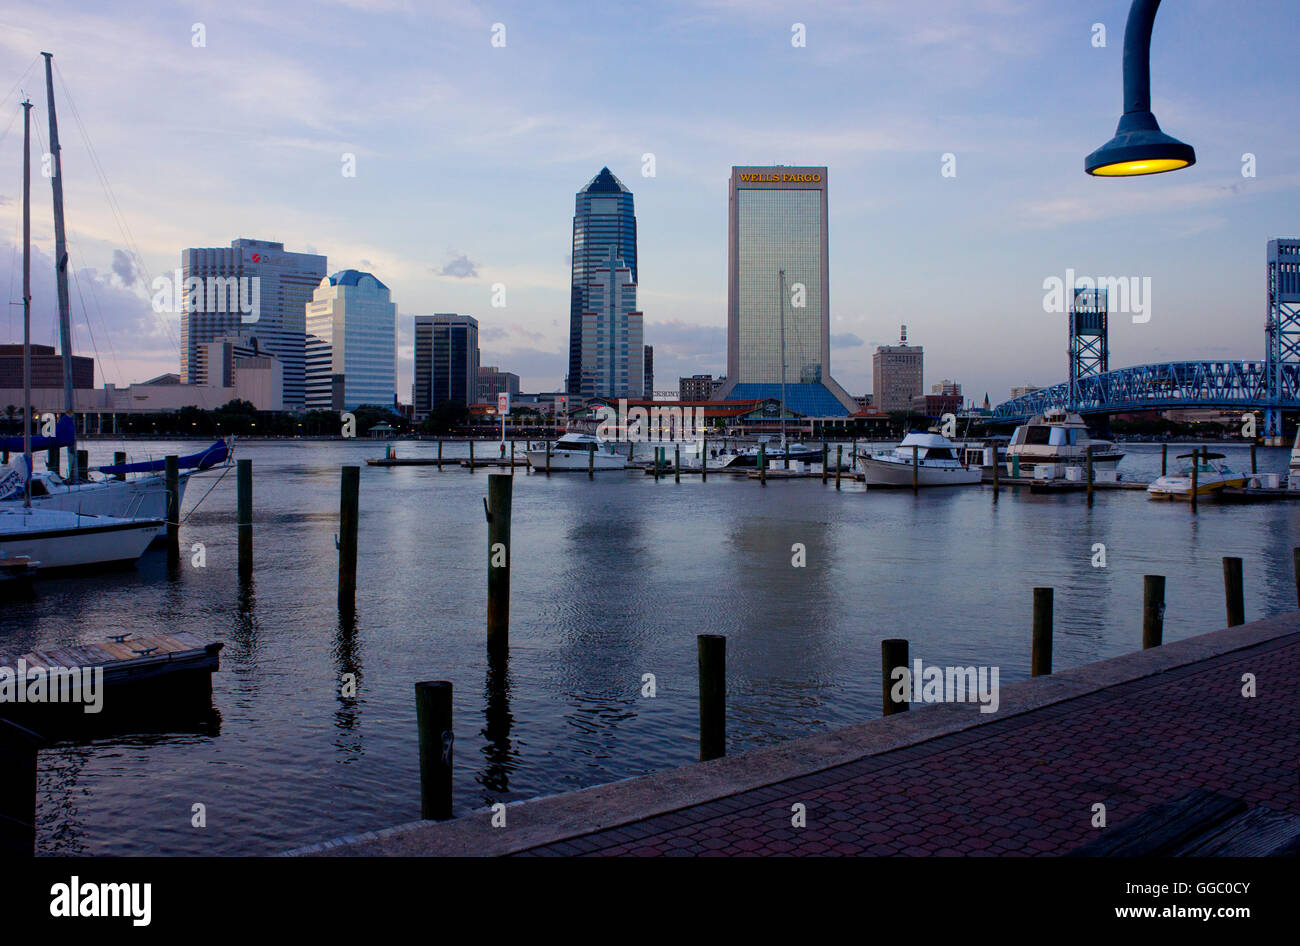 Jacksonville, Florida skyline as seen from the boat docks in early evening. Stock Photo